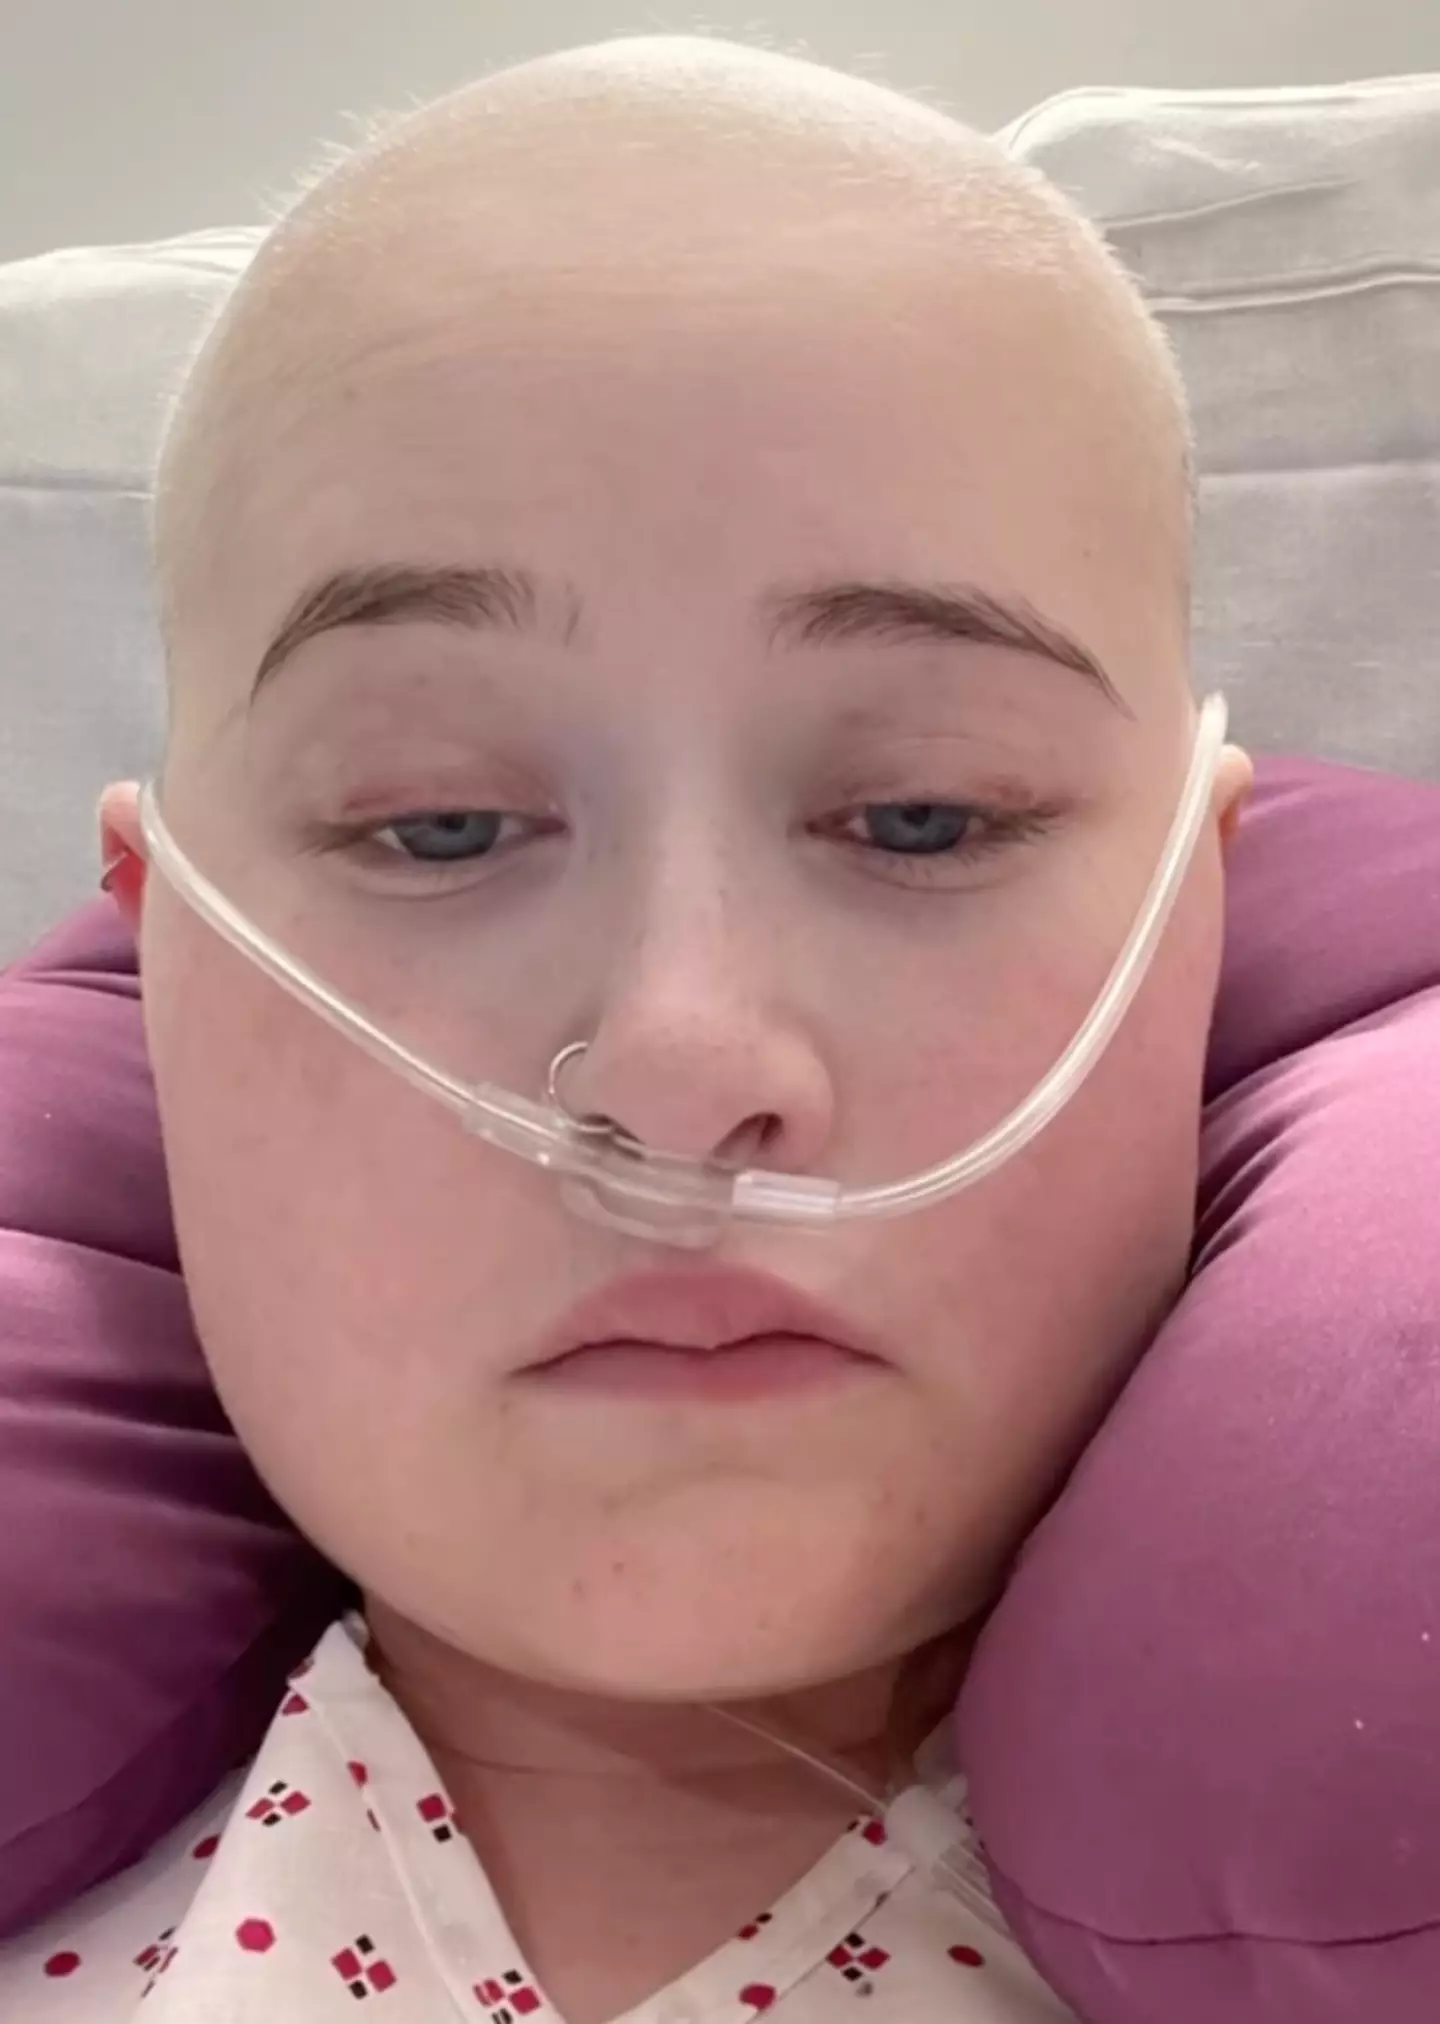 Shell Rowe was first diagnosed with cancer in 2019. (Instagram/shellrowex)